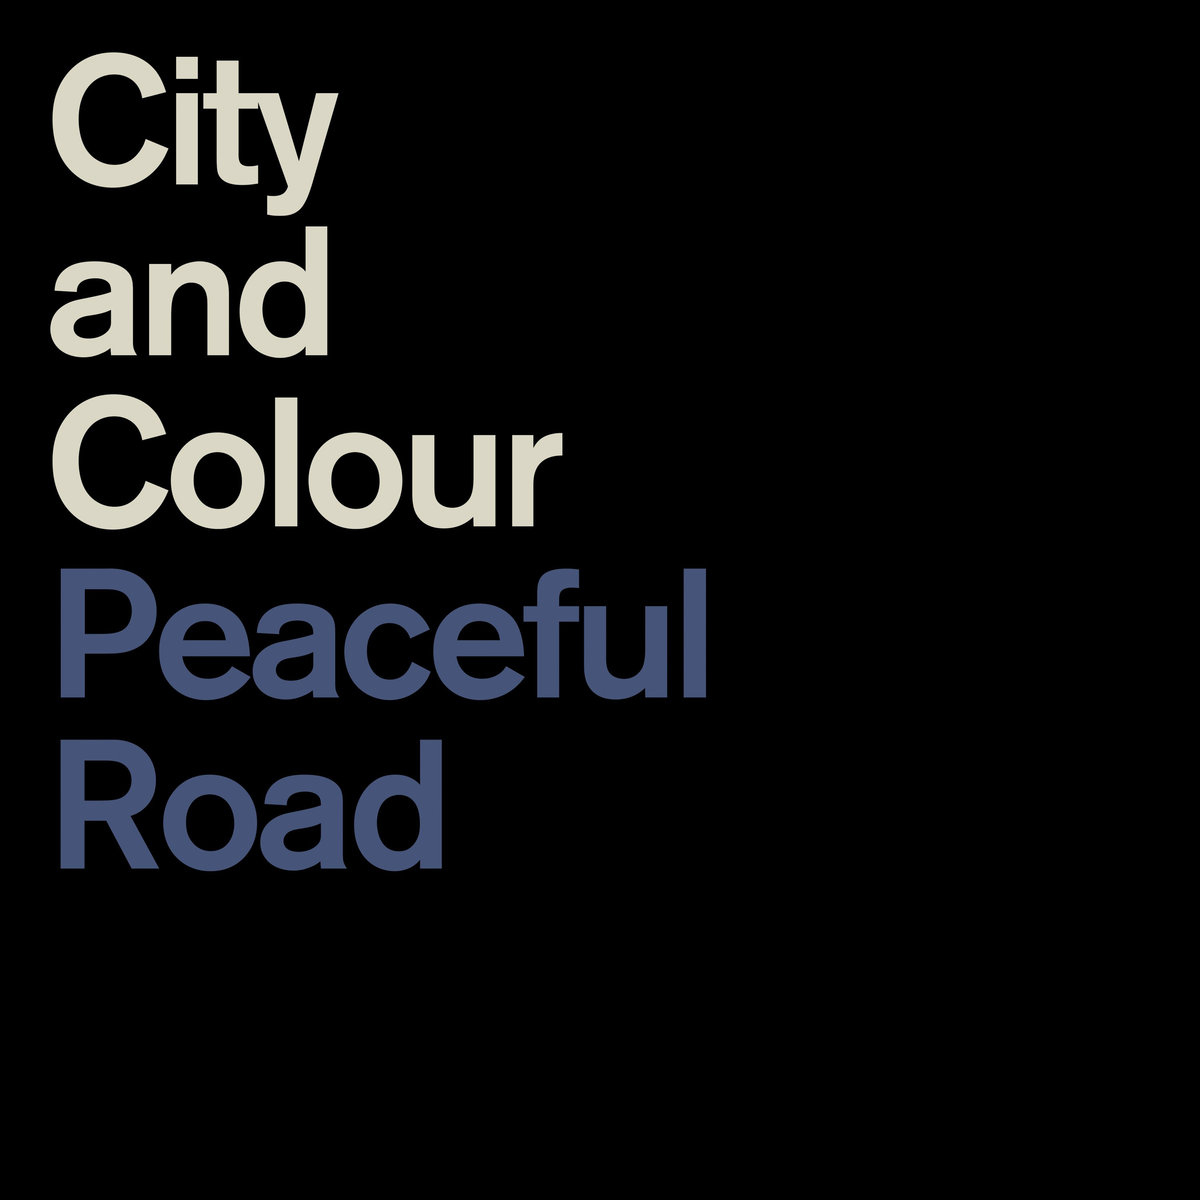 Discographie - City And Colour - Dallas Green - Peaceful Road